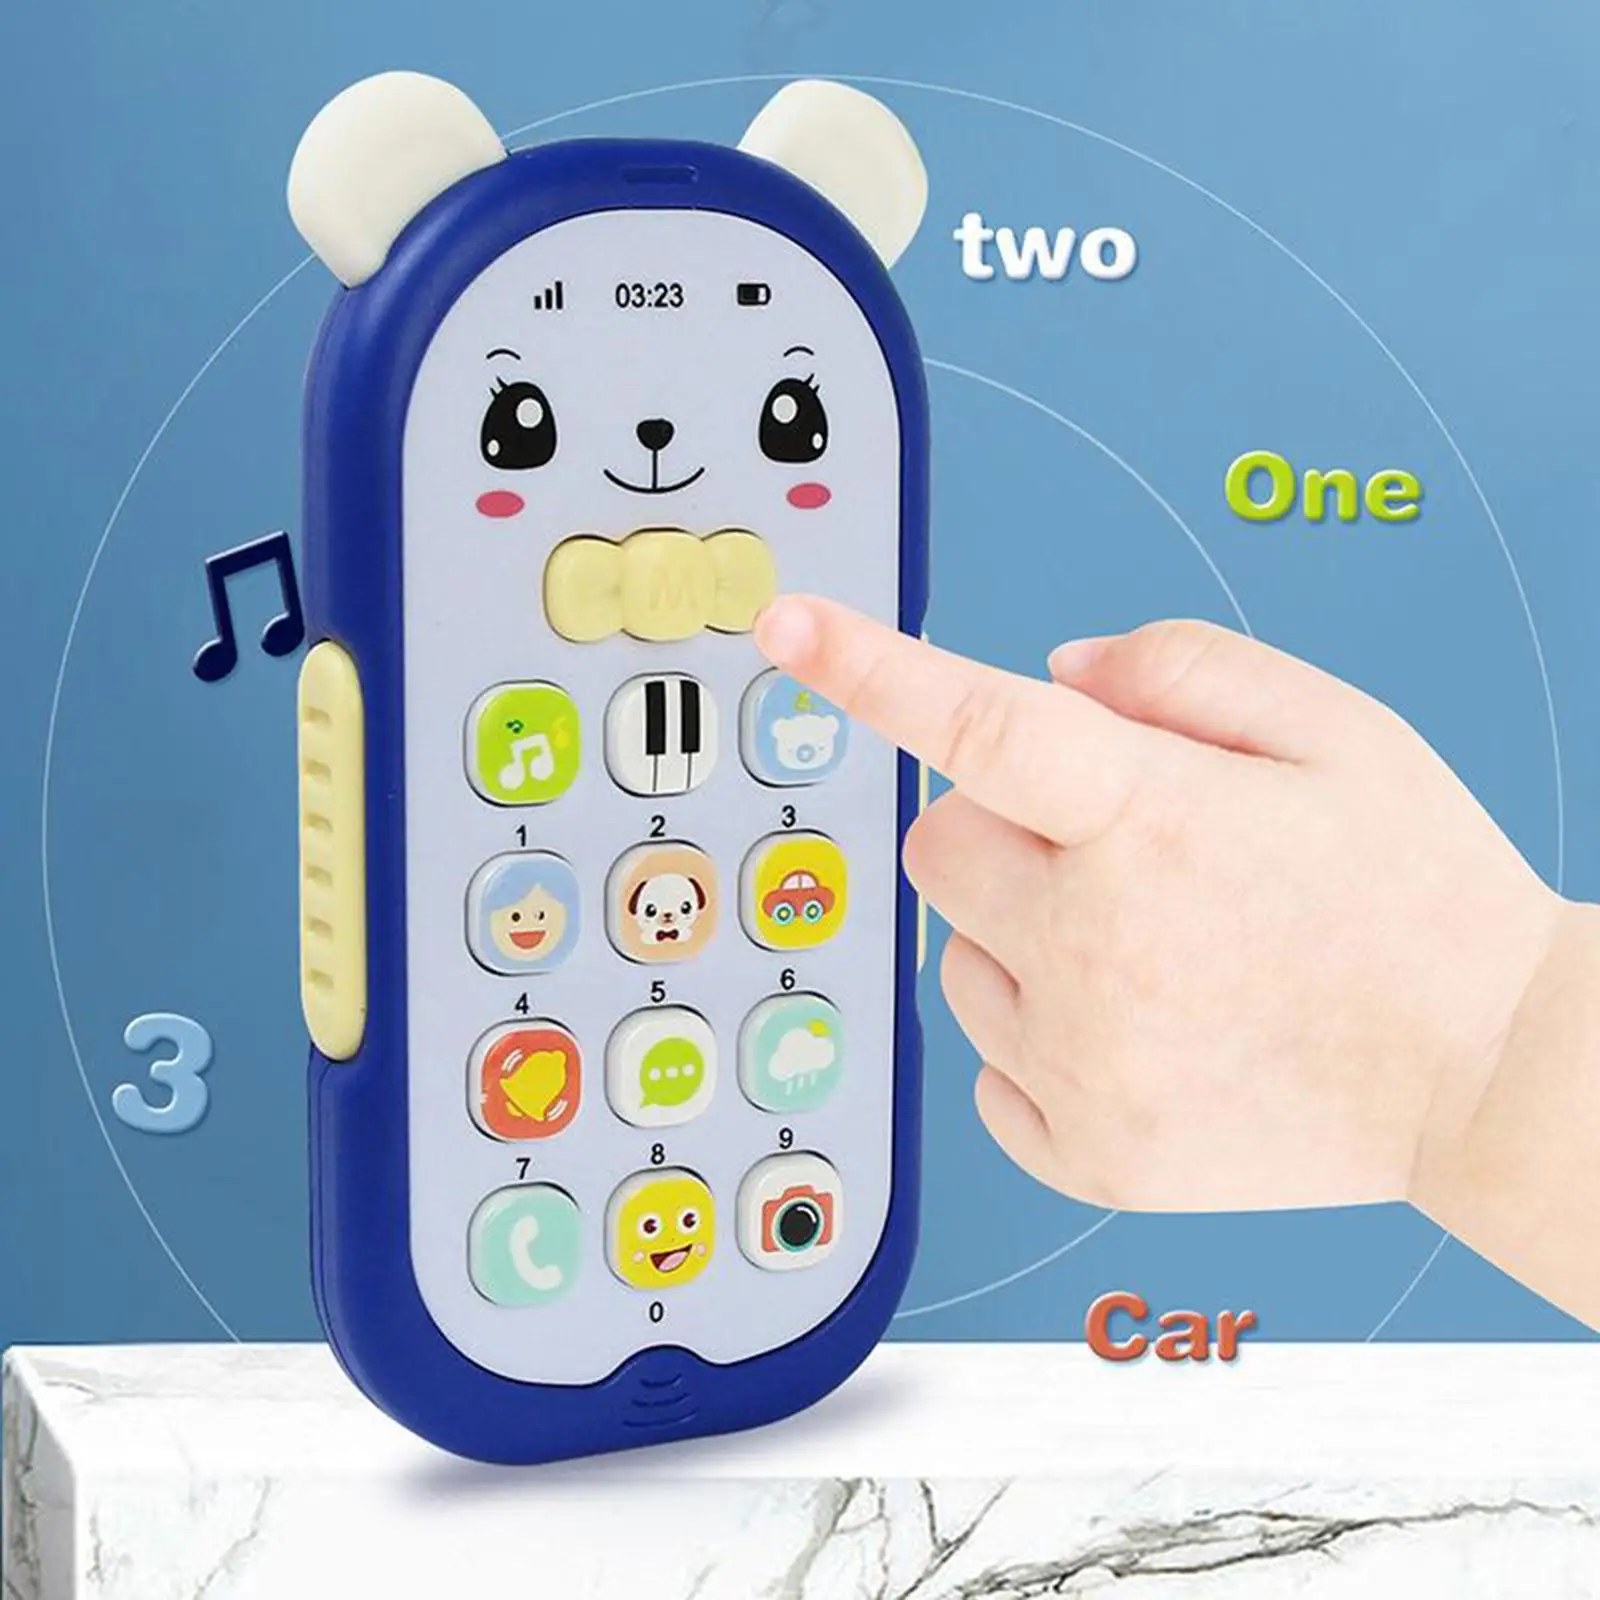  Toy Mobile Telephone Early Educational Chinese/English Learning